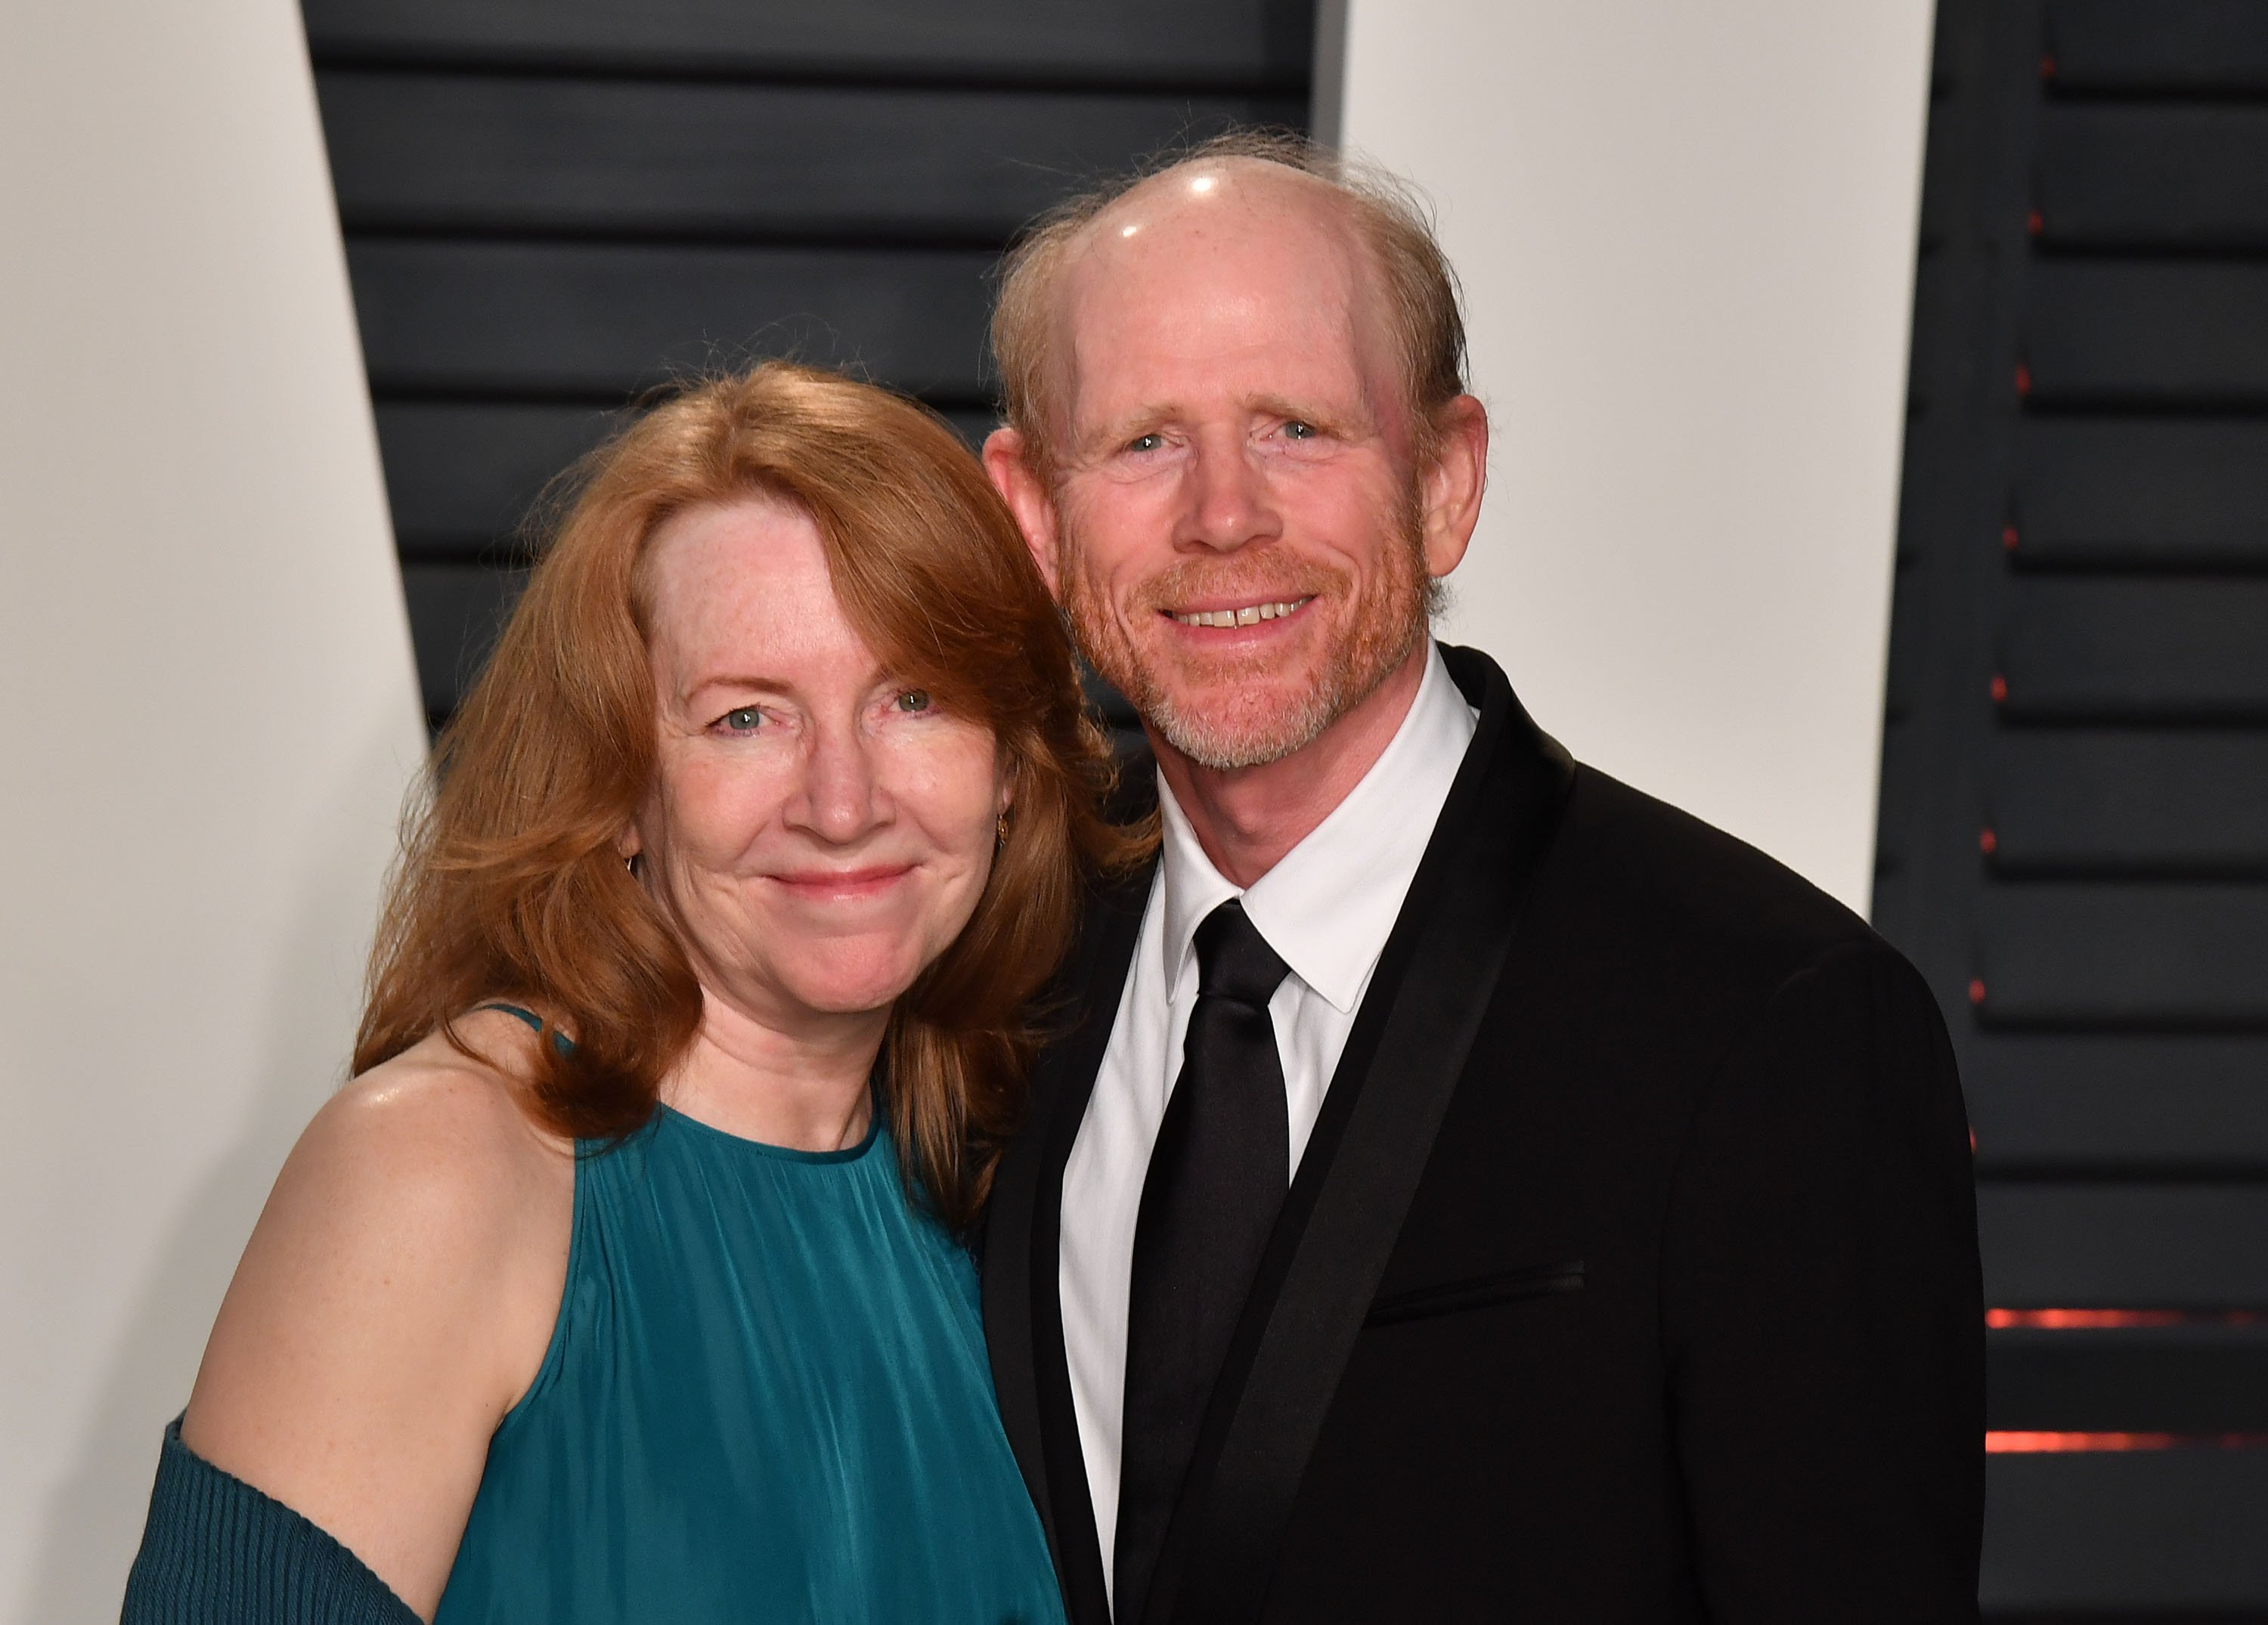 Ron Howard and Cheryl Howard attend the 2017 Vanity Fair Oscar Party hosted by Graydon Carter at the Wallis Annenberg Center for the Performing Arts on February 26, 2017, in Beverly Hills, California. | Source: Getty Images